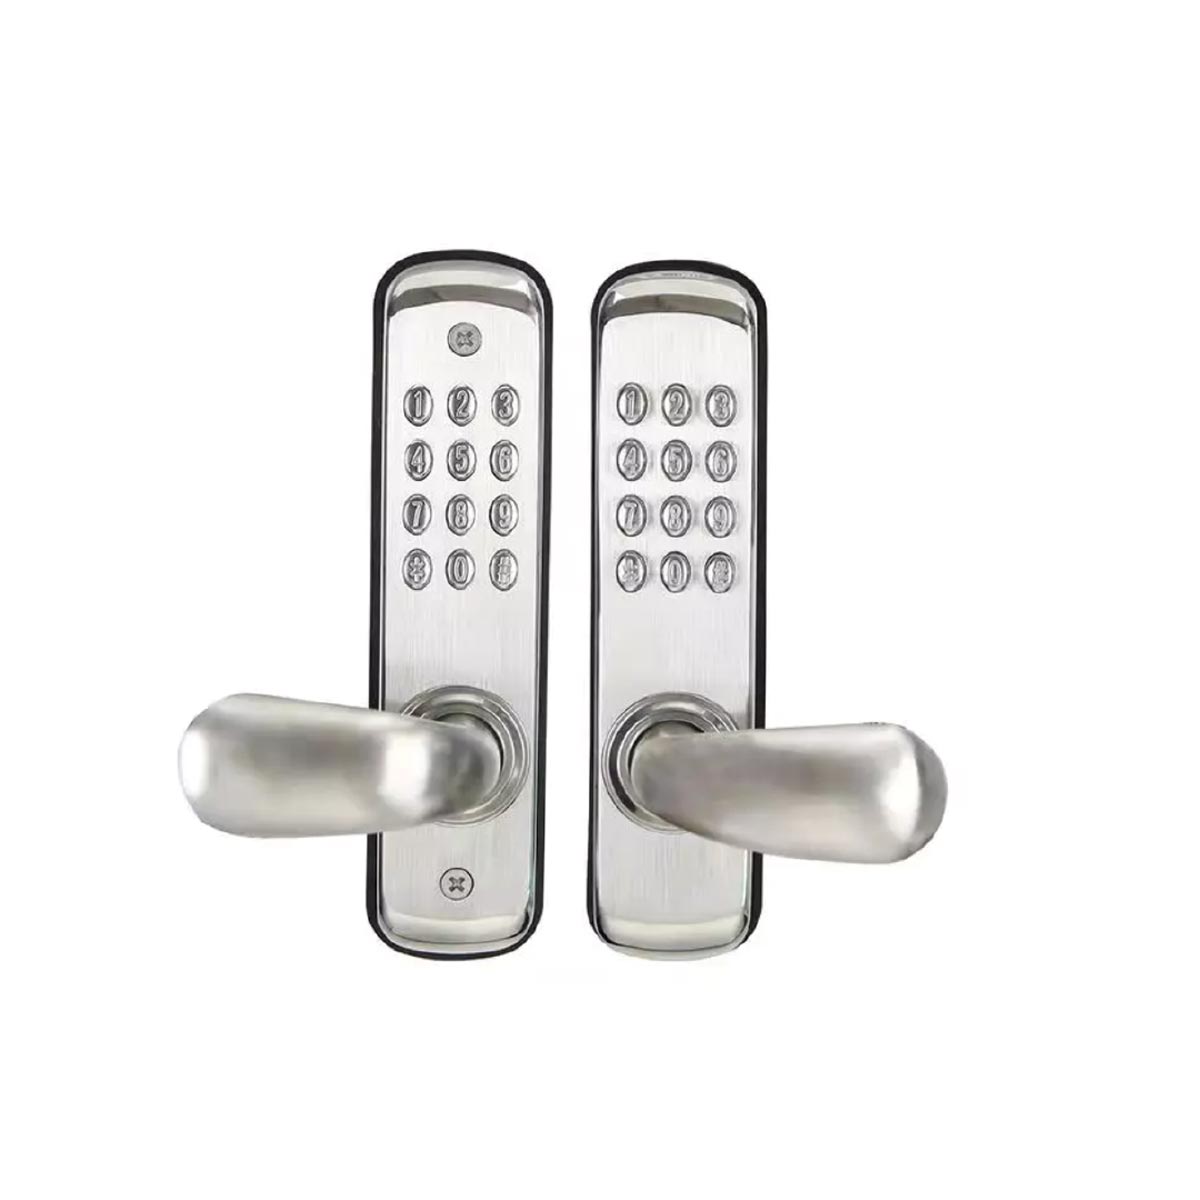 S701-DB-lock-silver-mechanical lock with PIN